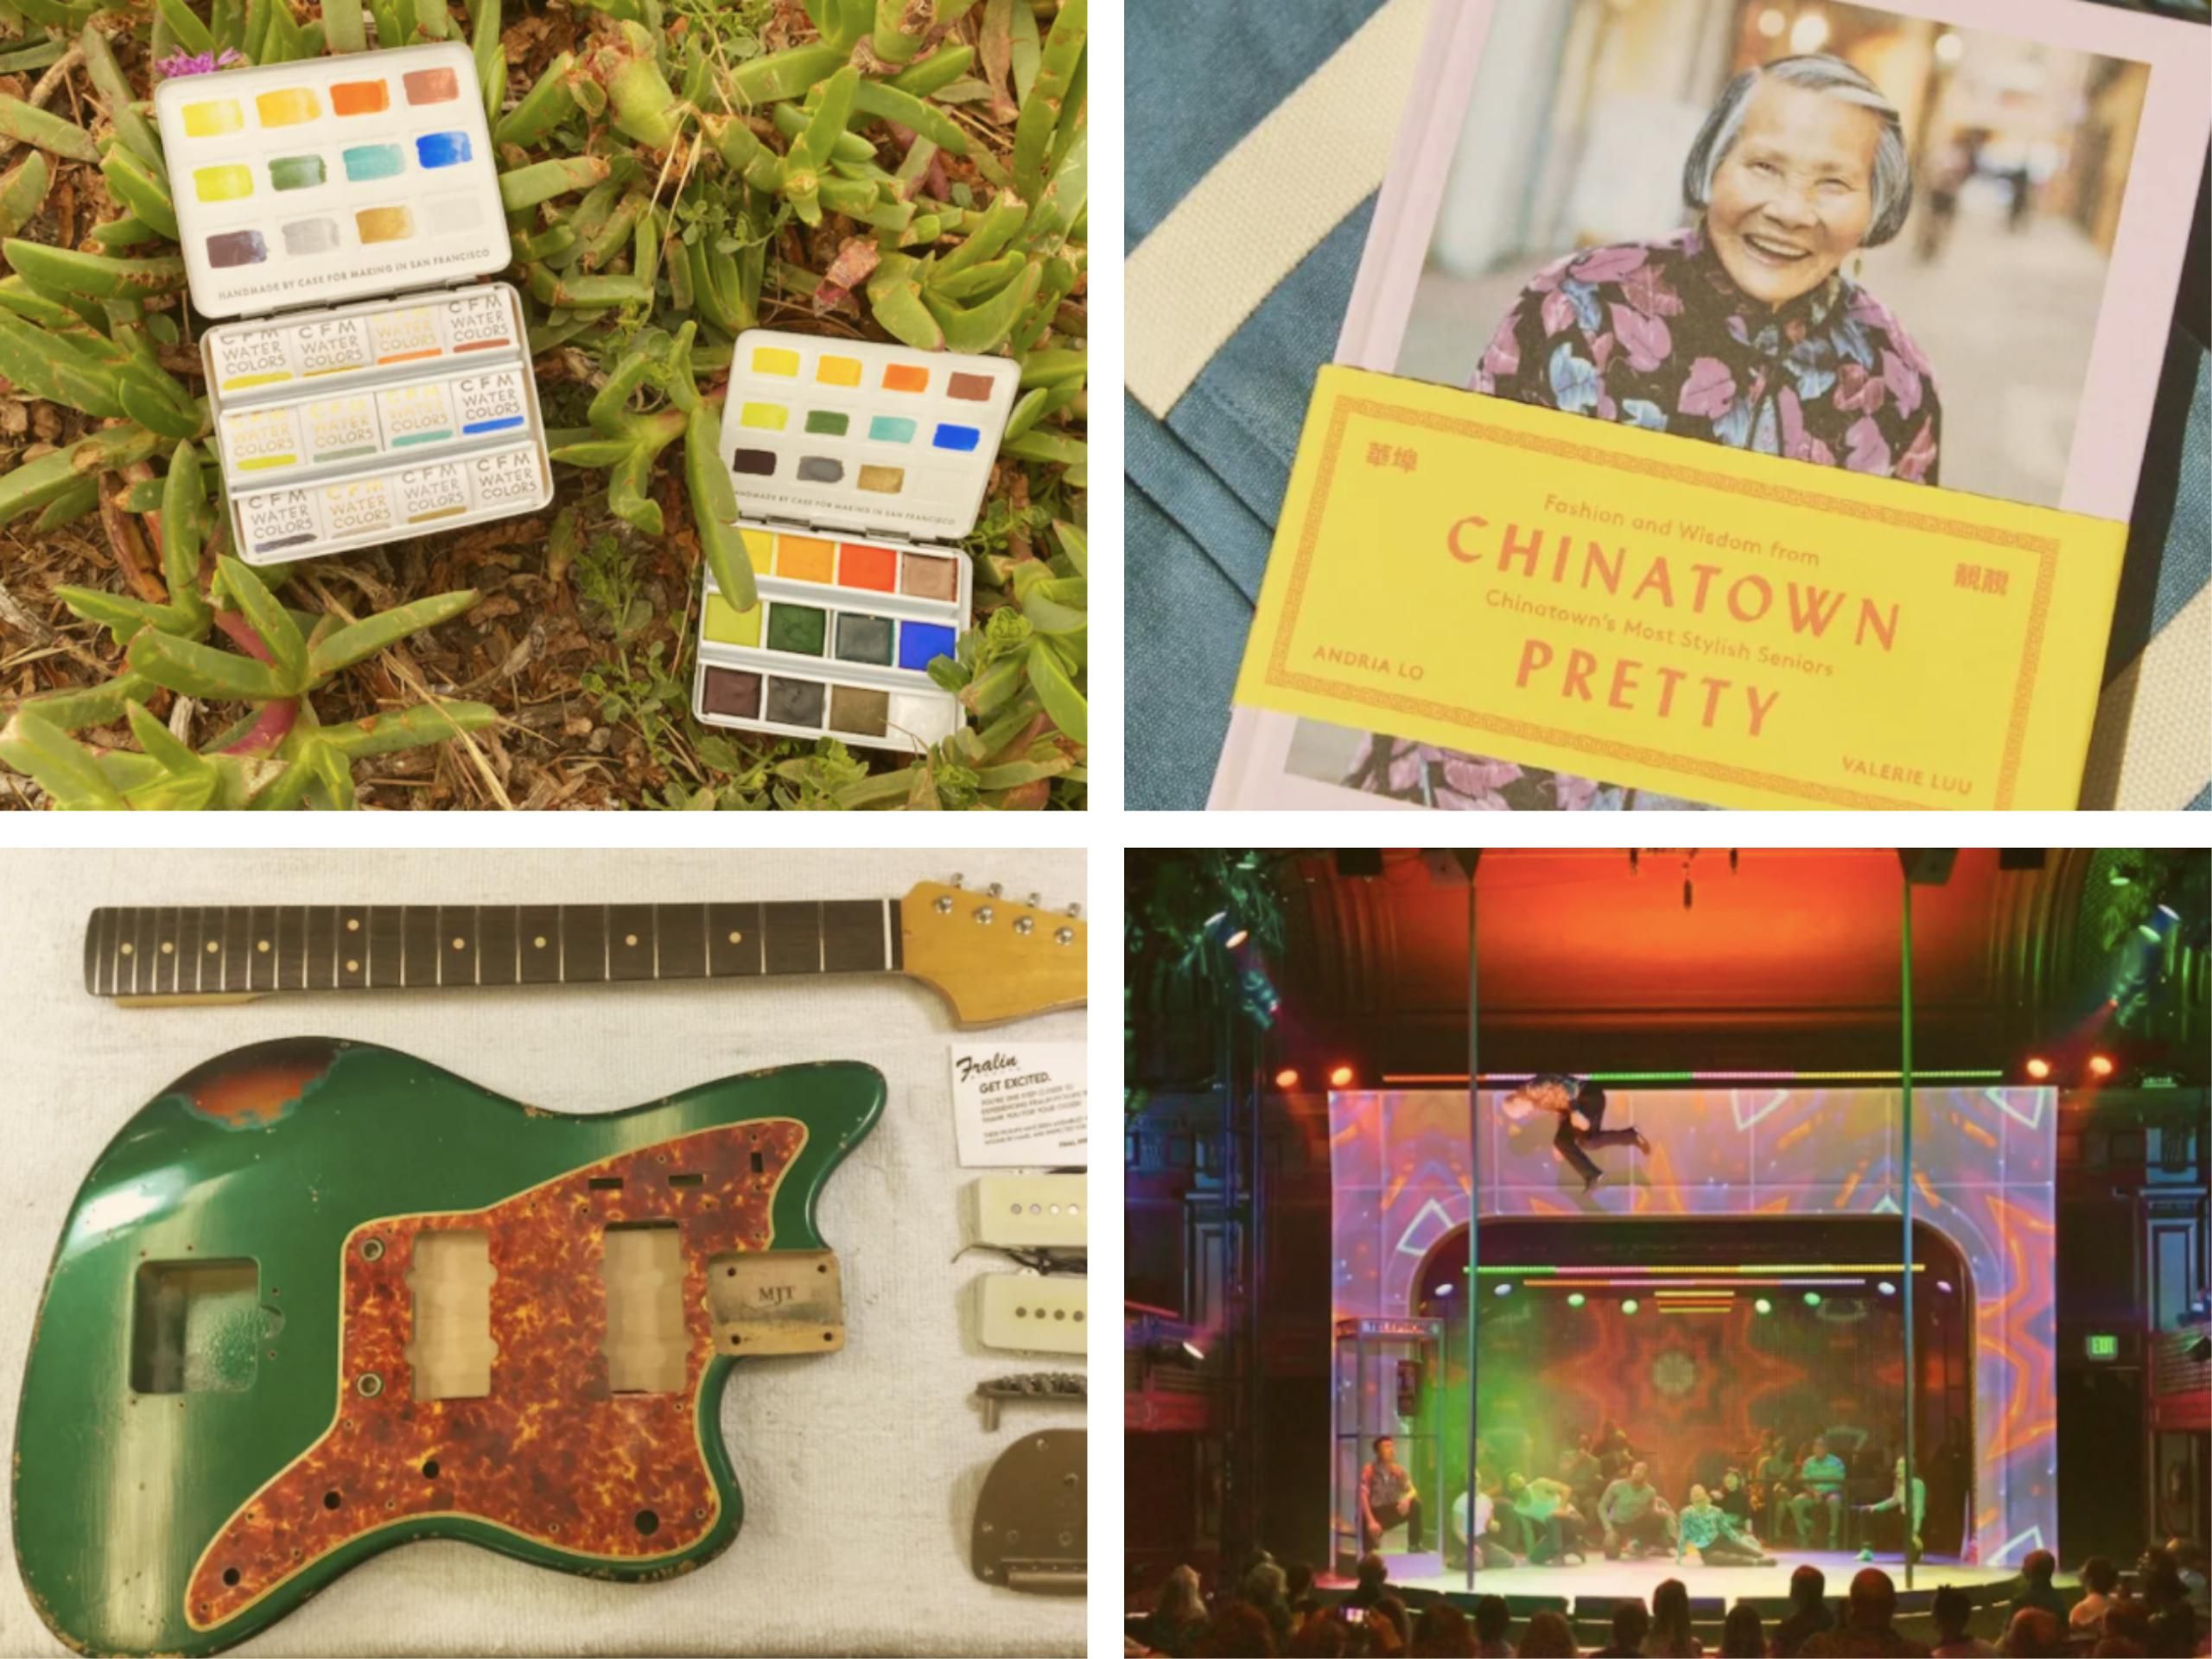 Creative Made-in-the-Bay Gifts for Artists, Musicians + Culture Seekers